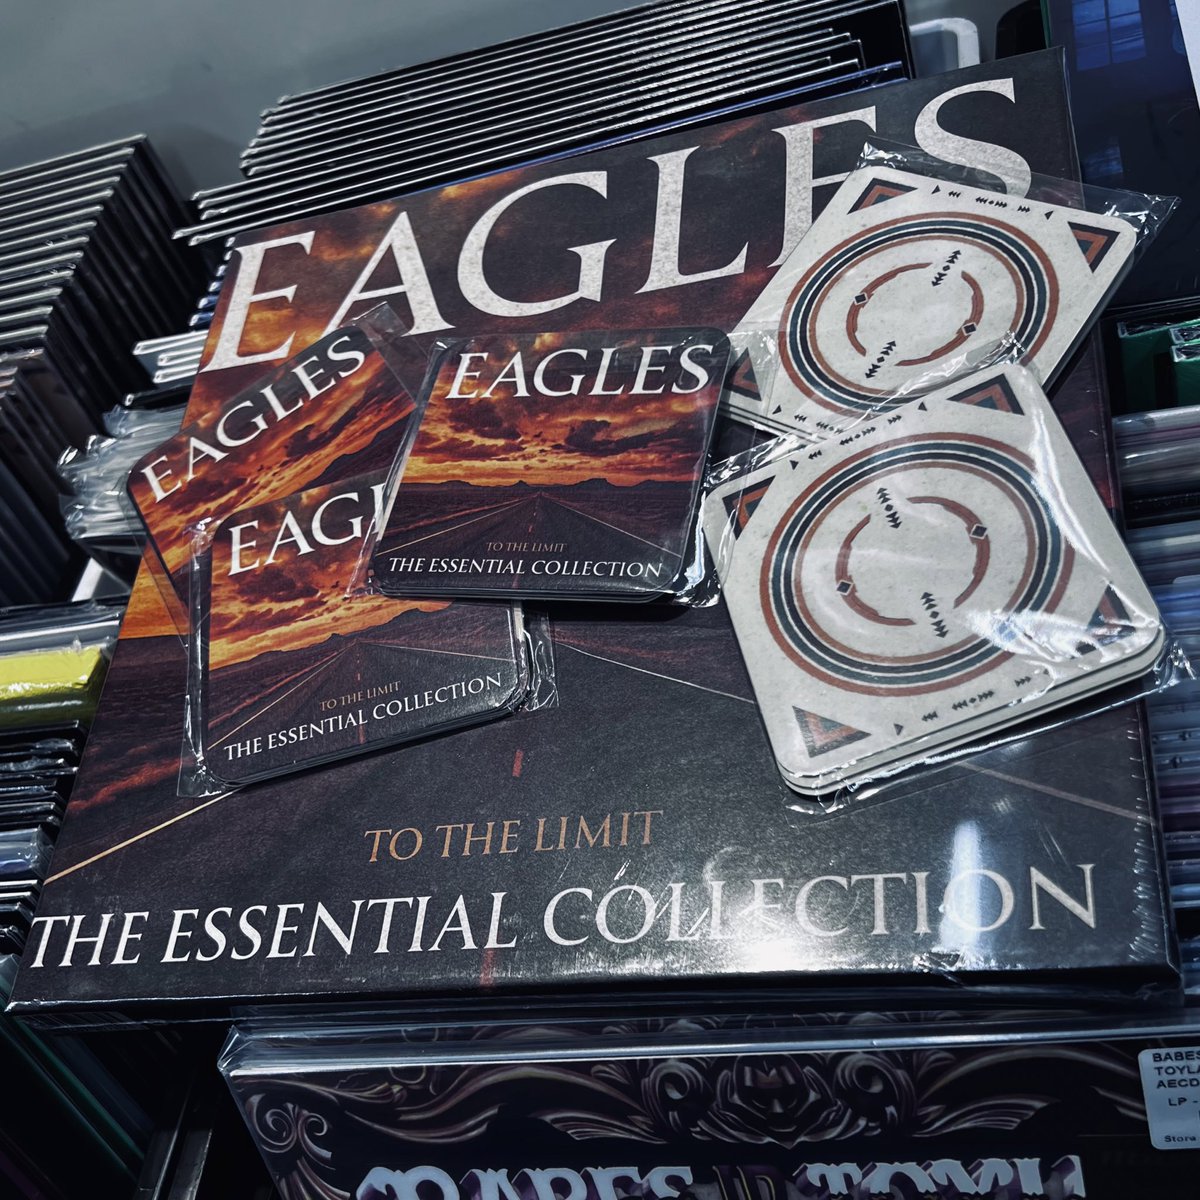 Friday, April 12! Free #EAGLES coaster with LP purchase of “To The Limit: The Essential Collection”